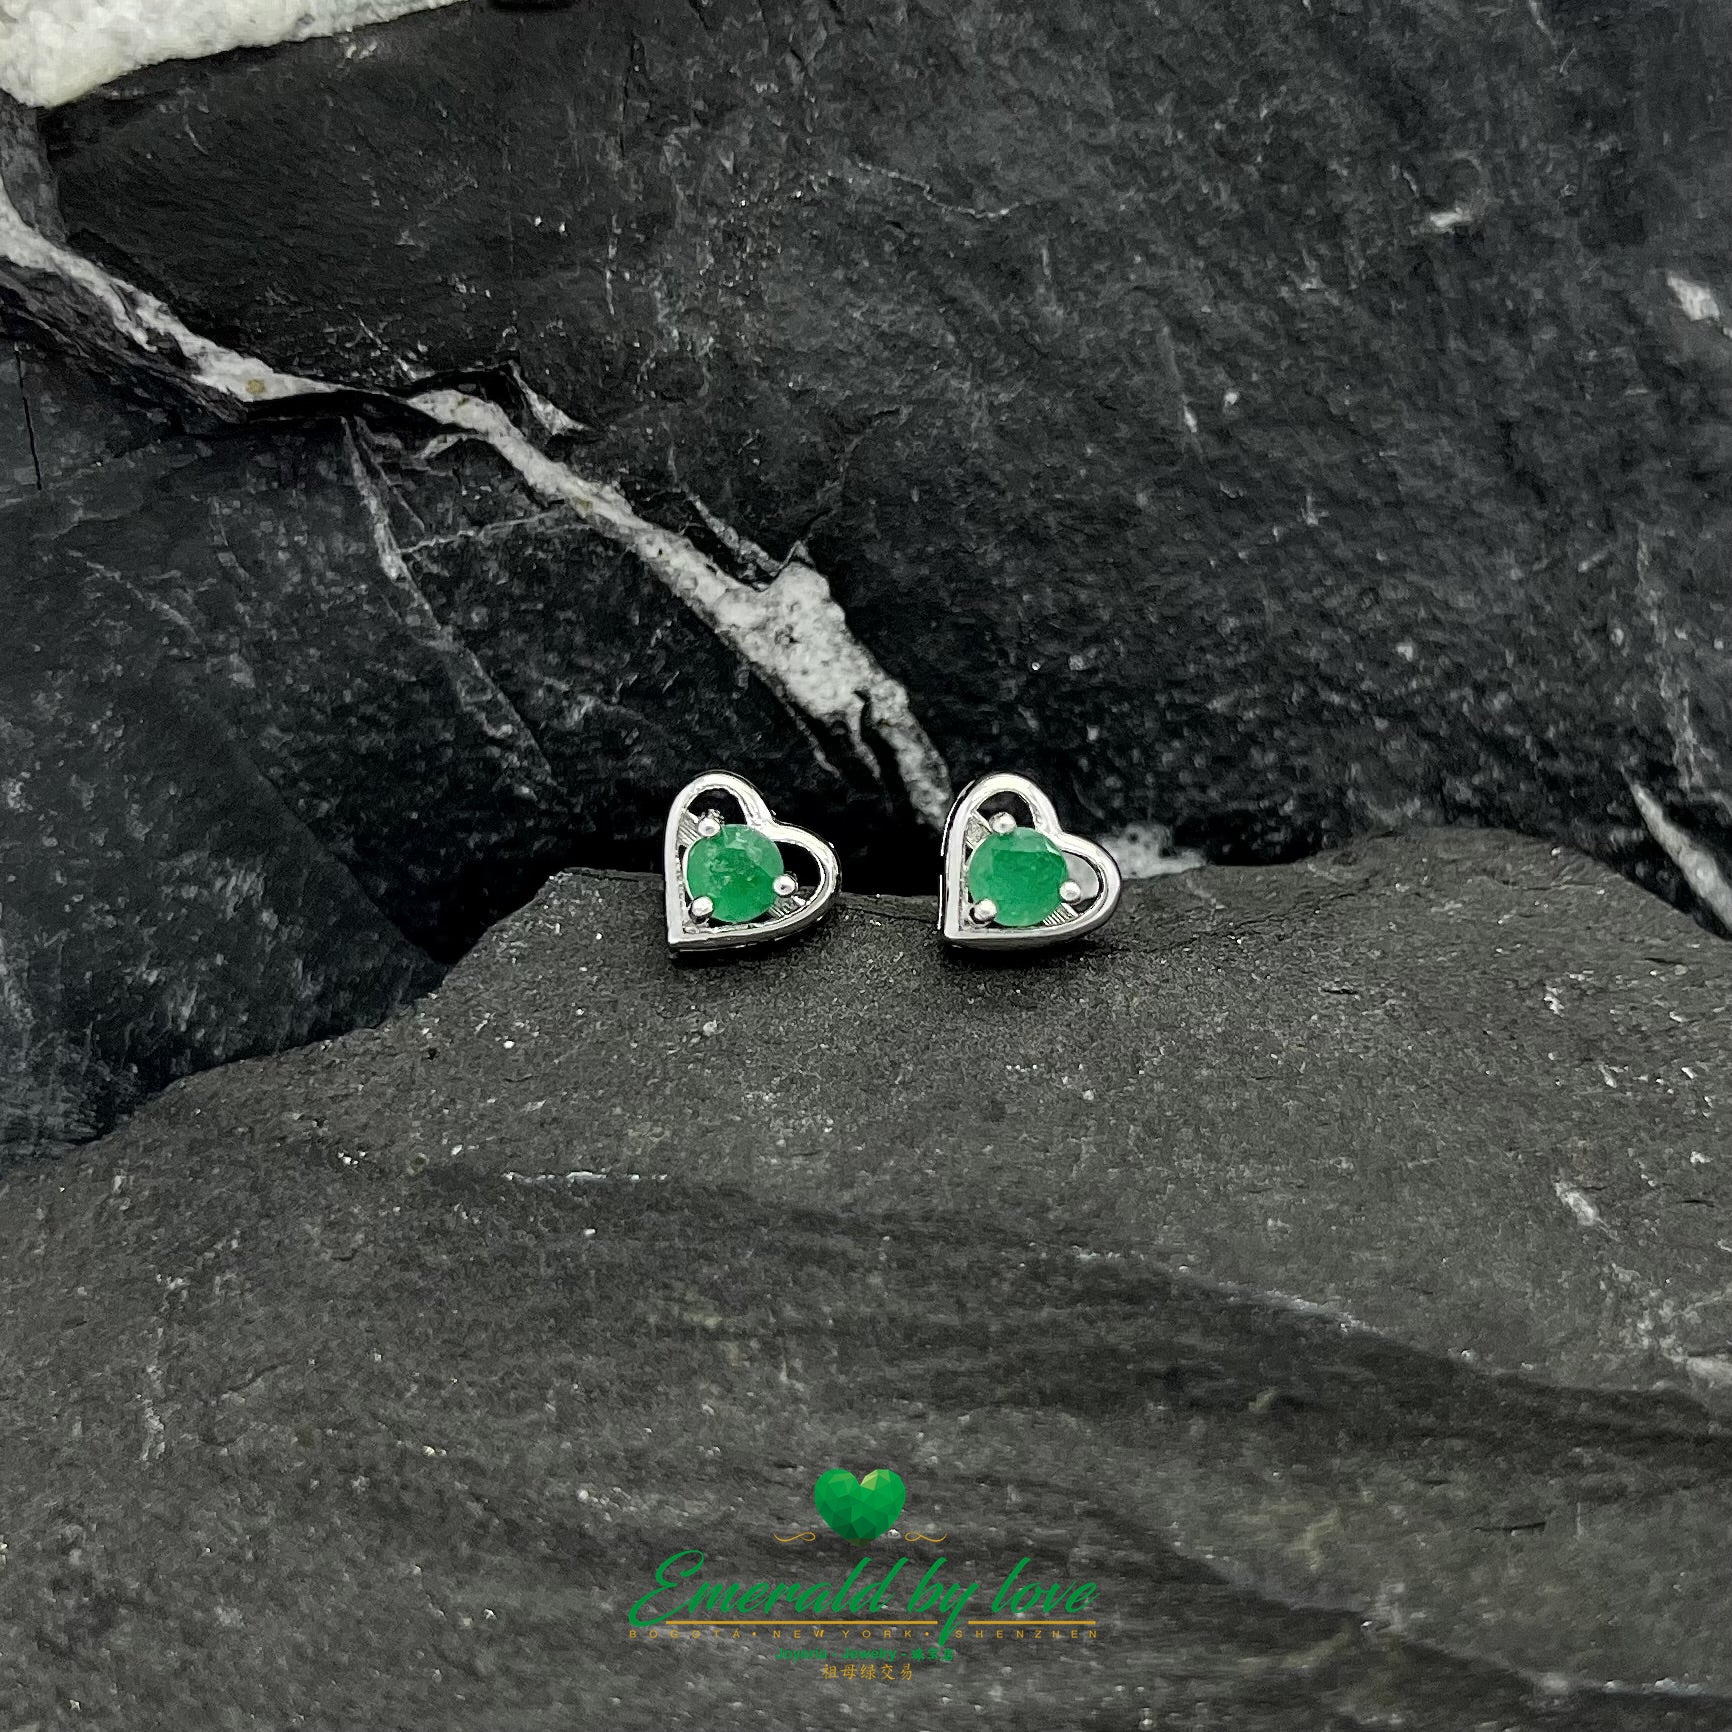 Heart-shaped Stud Earrings with Round Central Emerald